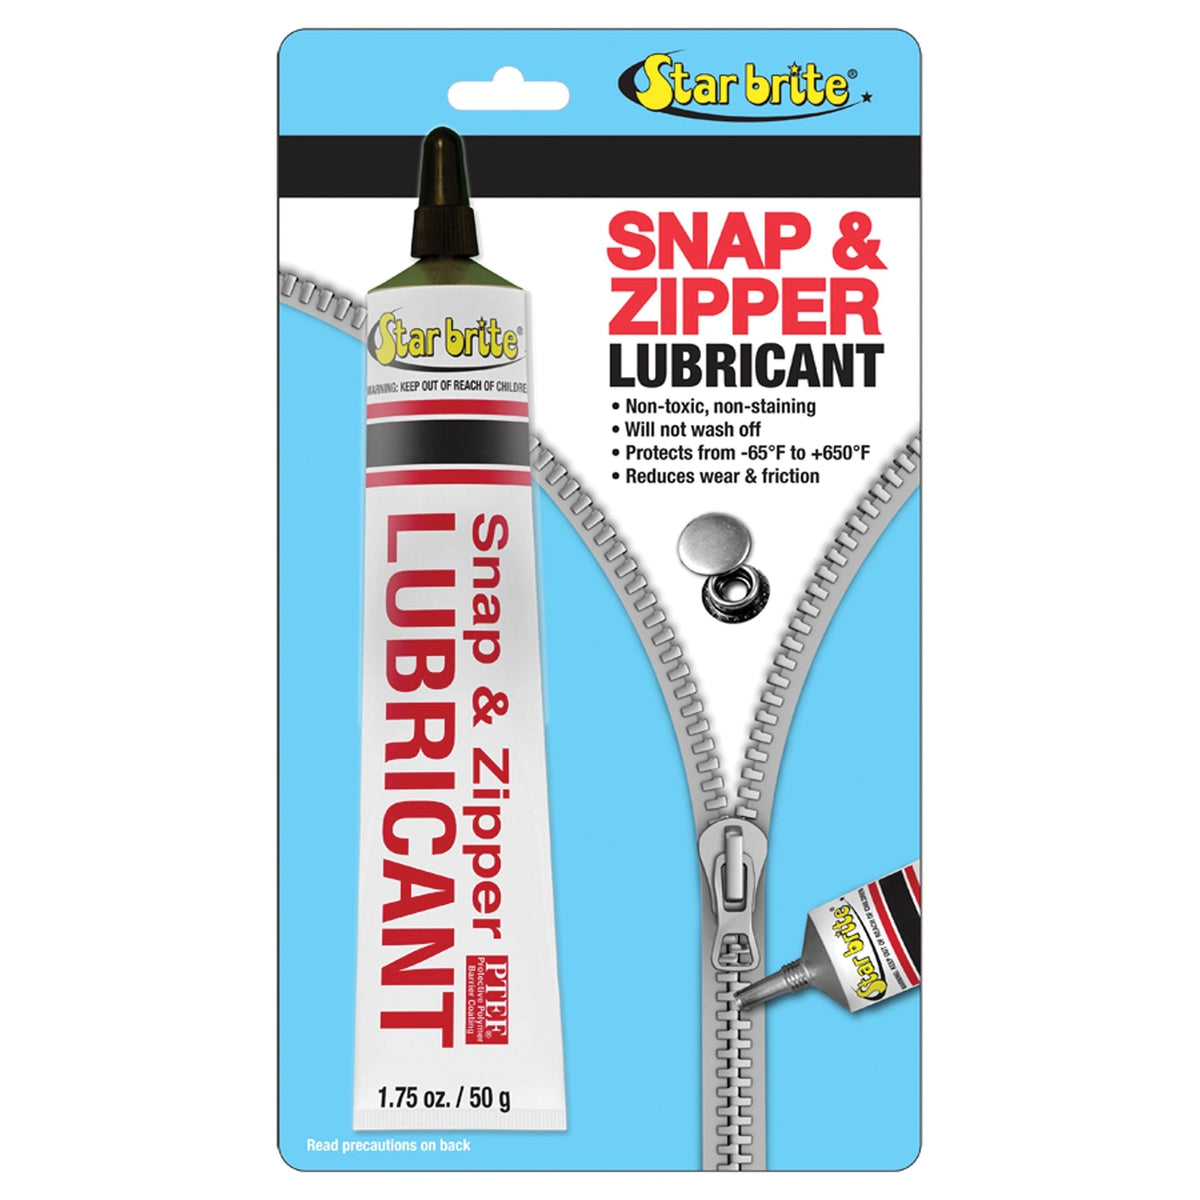 Star Brite Qualifies for Free Shipping Star brite Snap & Zipper Lubricant 2 oz #089102